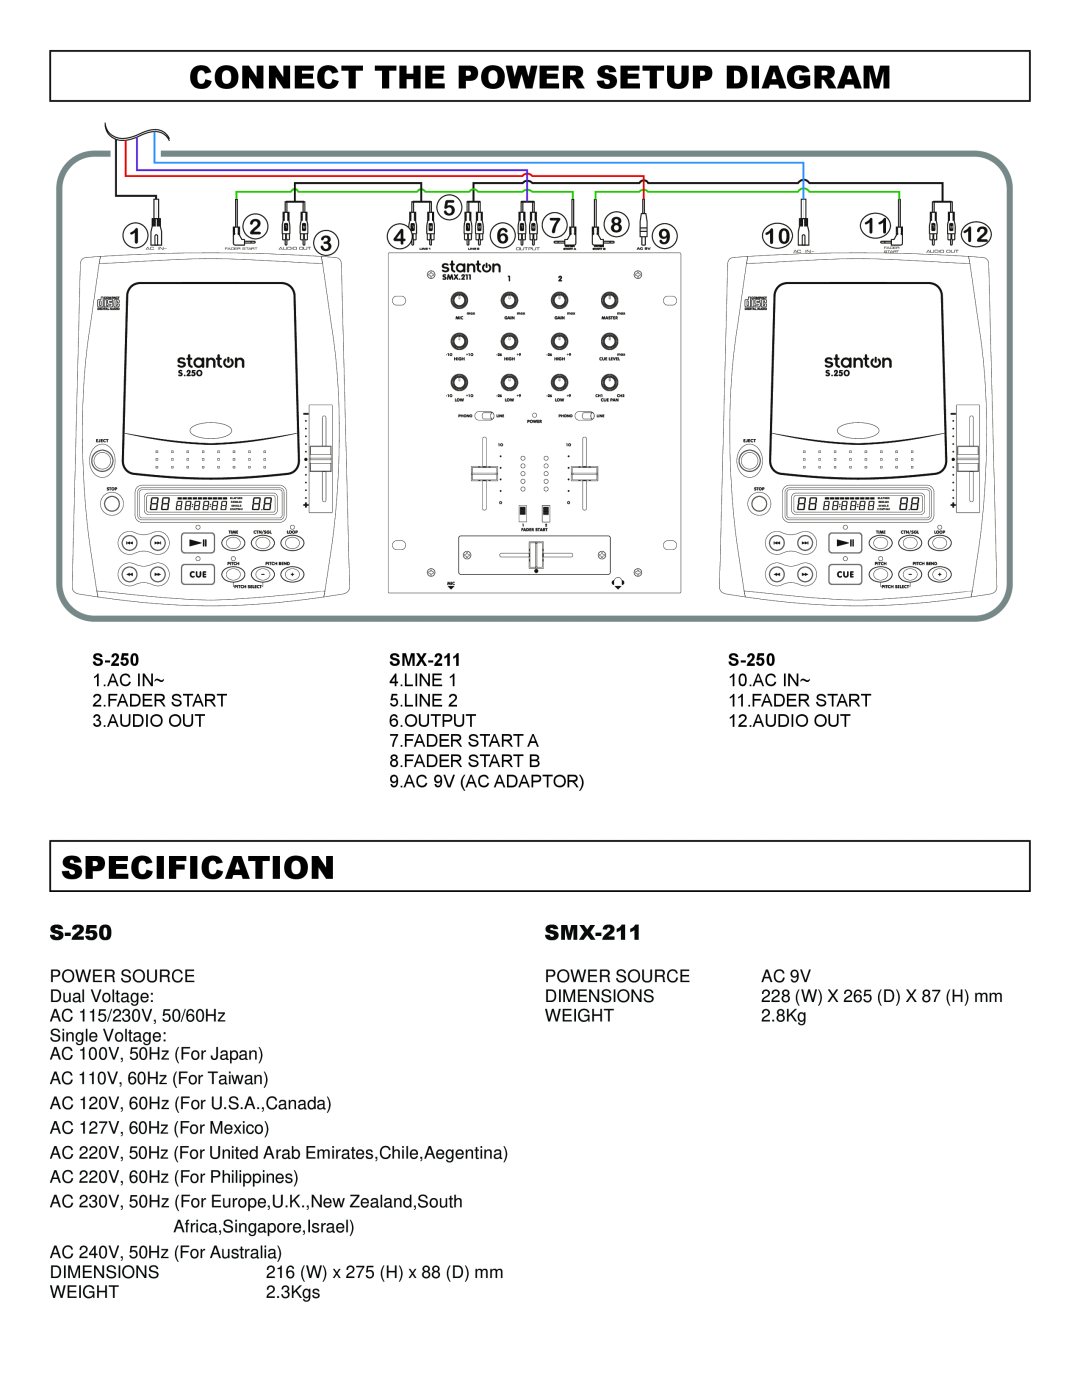 Stanton SINGLE TOP LOADING CD PLAYER PROFESSIONAL PREAMP MIXER Connect The Power Setup Diagram, Specification, S-250 